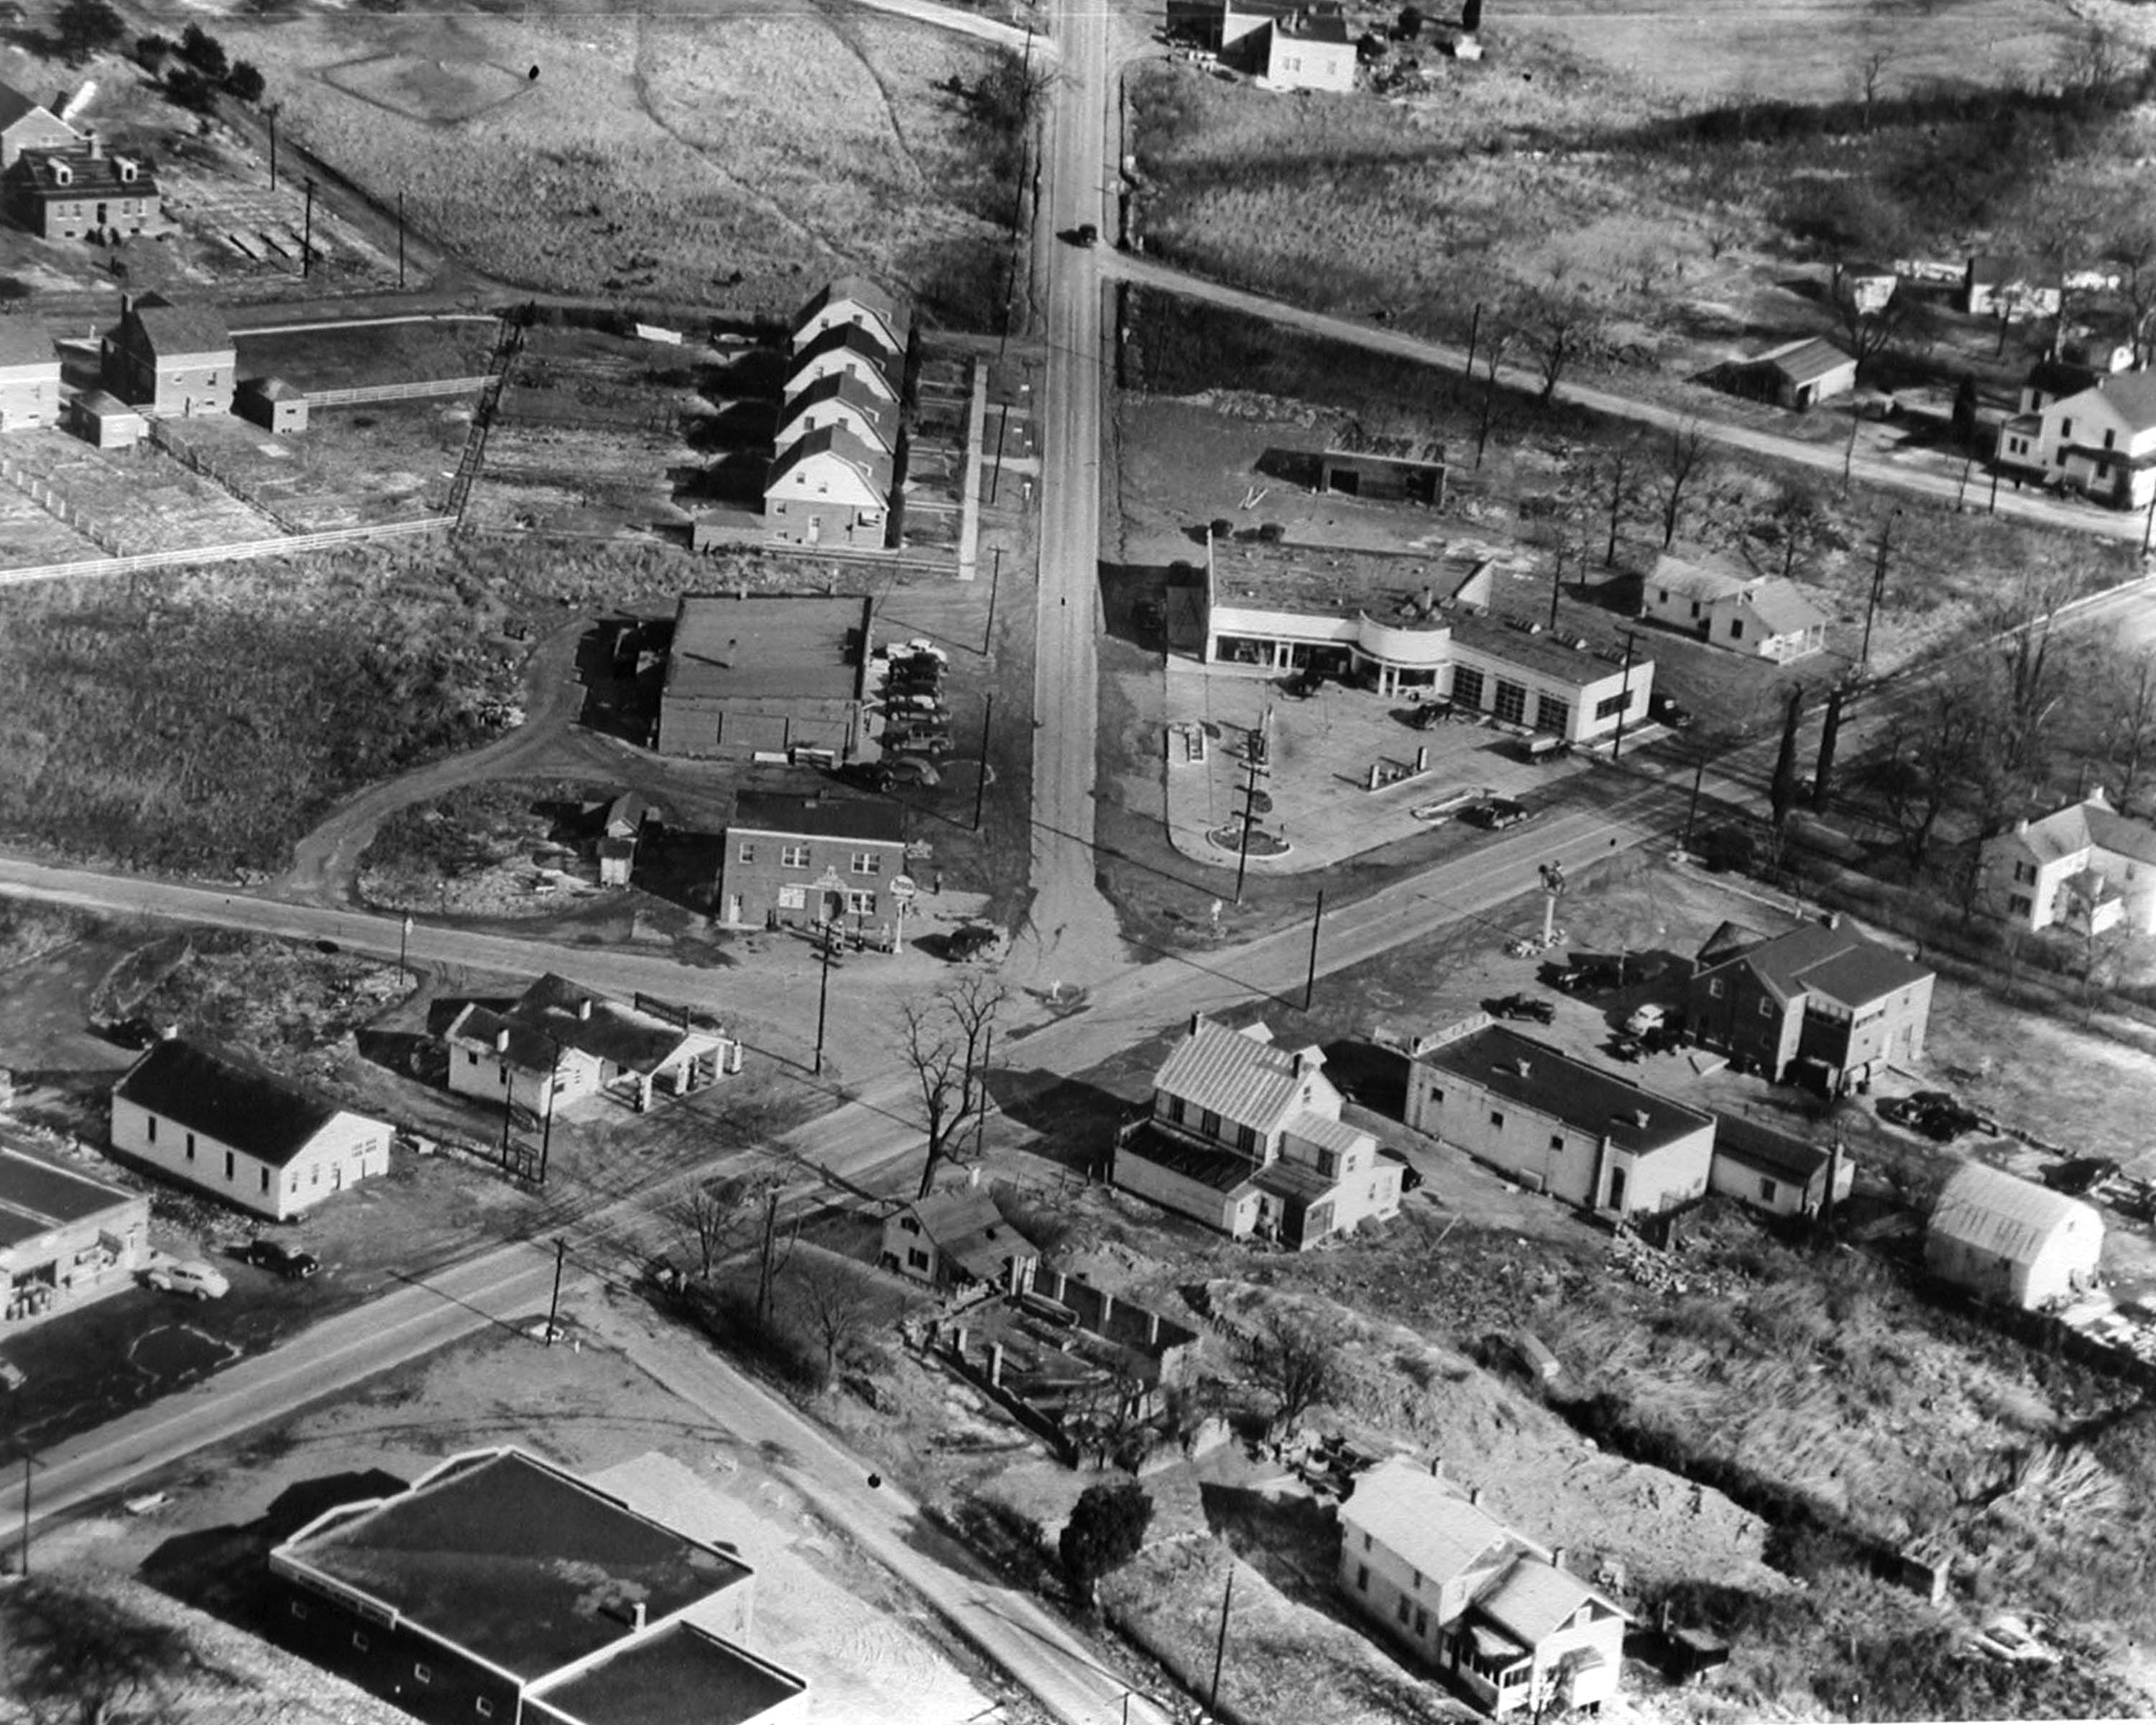 The heart of Annandale was the triangle where Willis Esso was located, later Three Chefs and then Fuddrucker's.